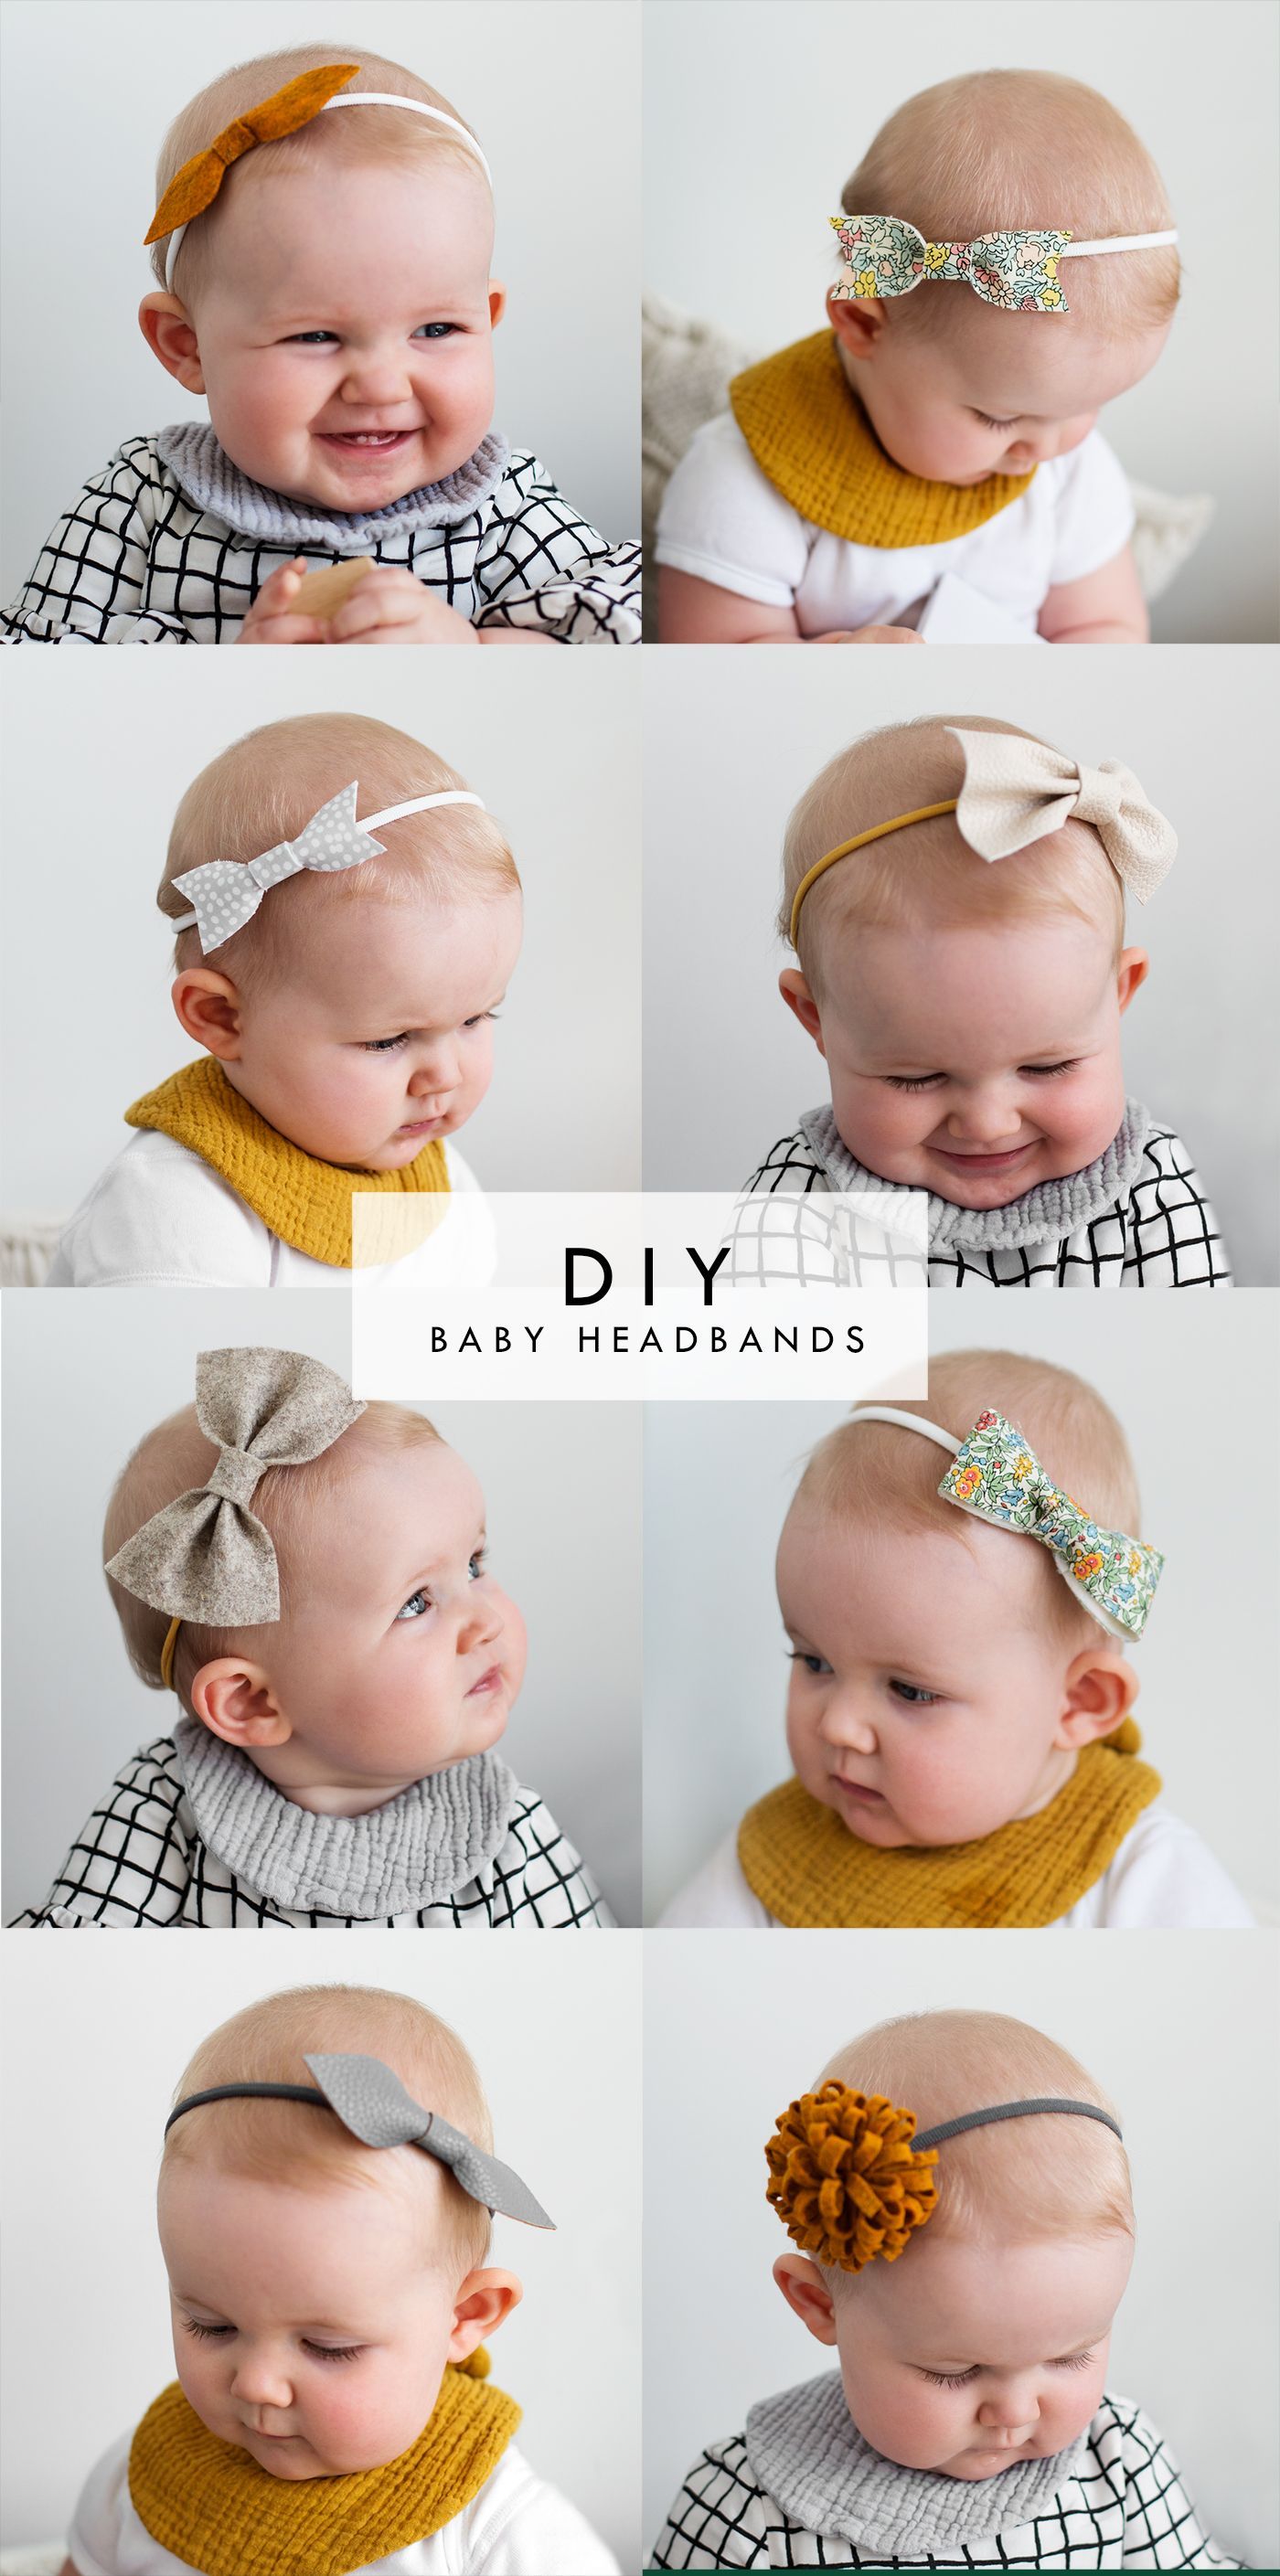 Pretty Little Thing | The Lovely Drawer - Pretty Little Thing | The Lovely Drawer -   17 diy Baby accessories ideas